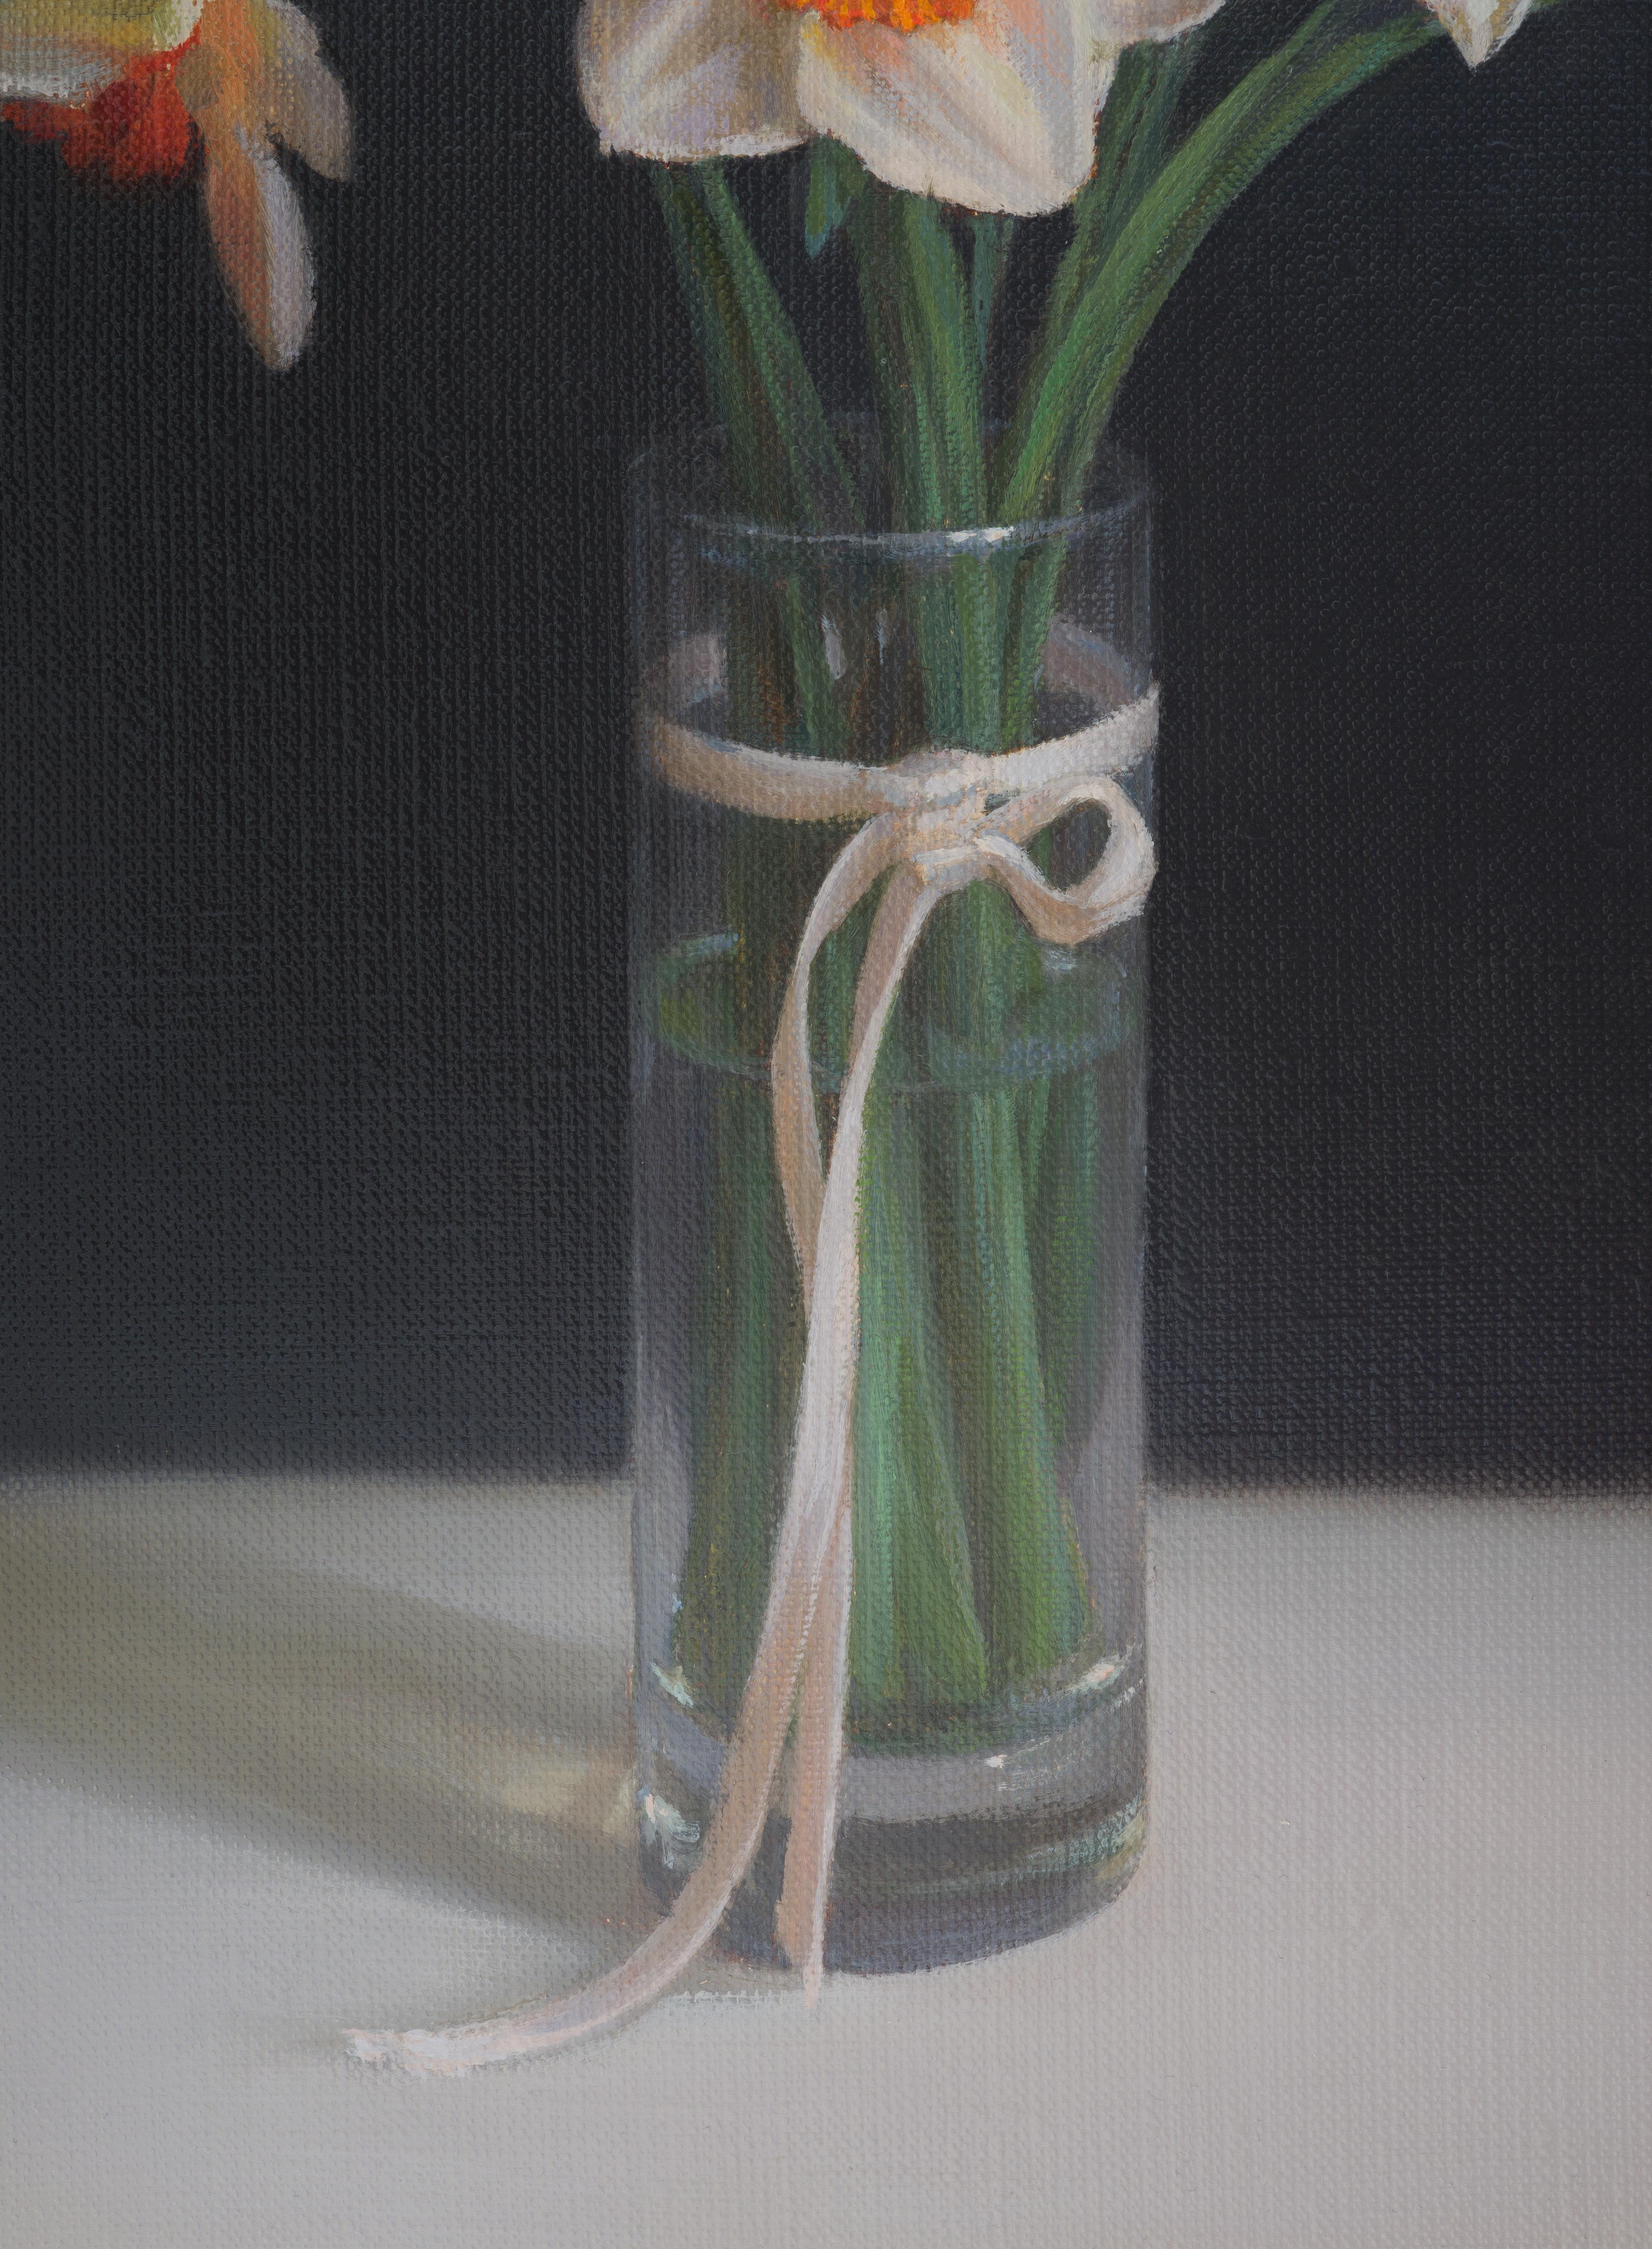 Gift, Realist Modern Still life oil painting with daffodils by Irina Trushkova For Sale 2